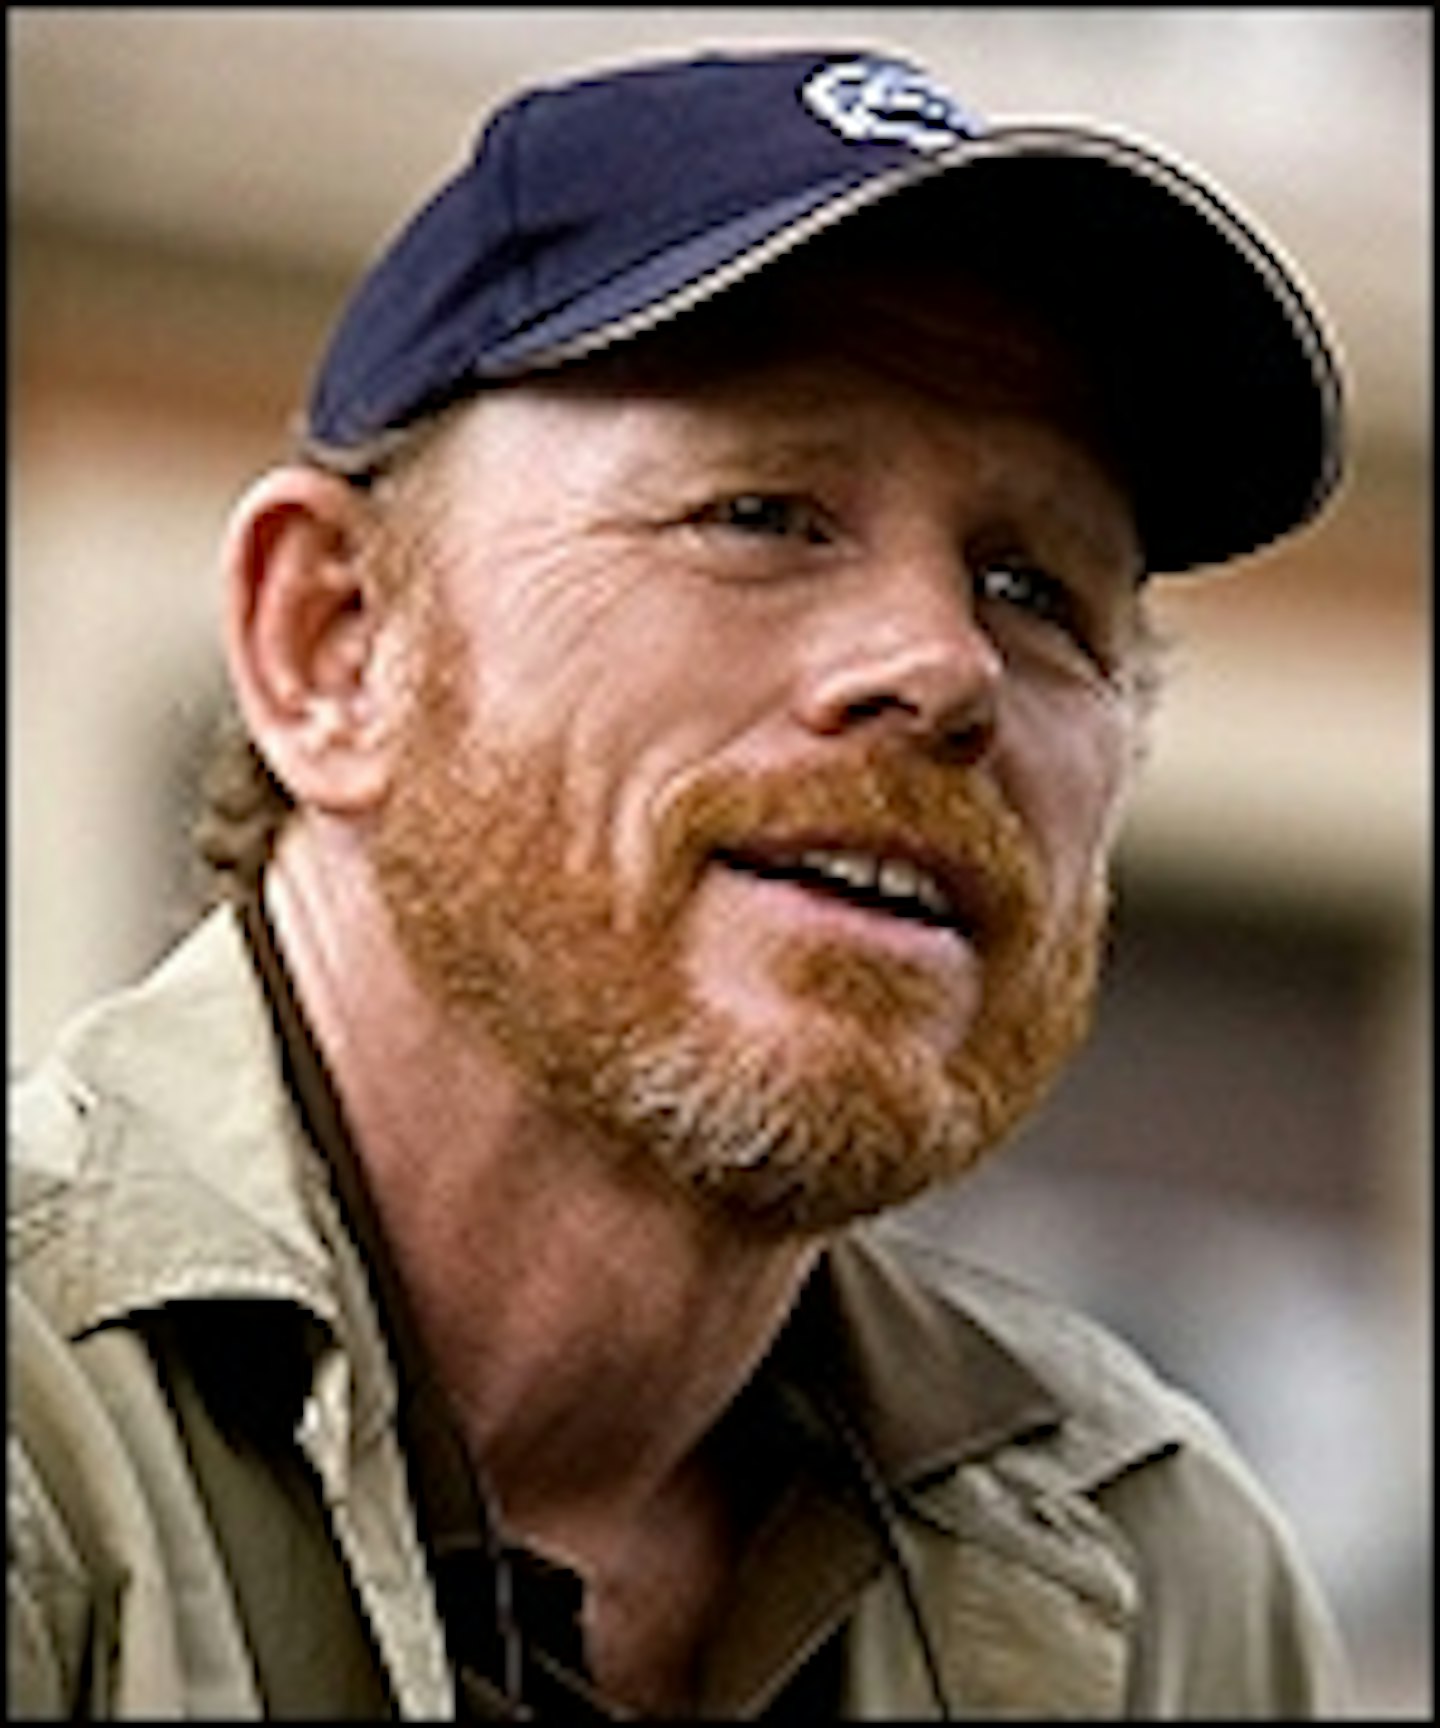 Ron Howard Looking For A Rush?